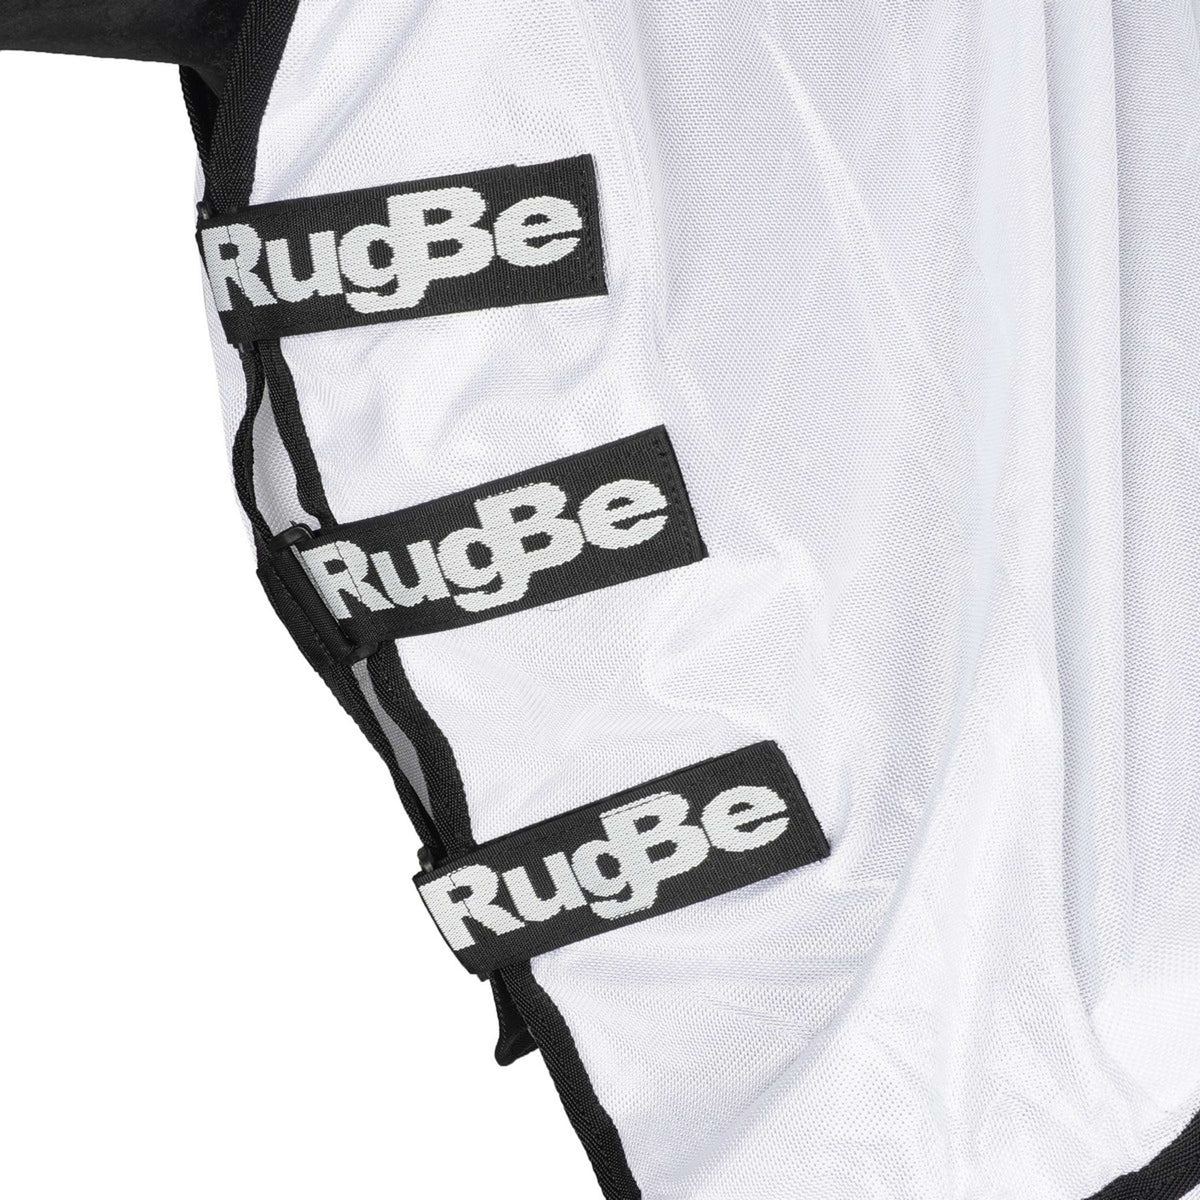 RugBe by Covalliero Couverture Anti-Mouches SuperFly avec Couvre-cou